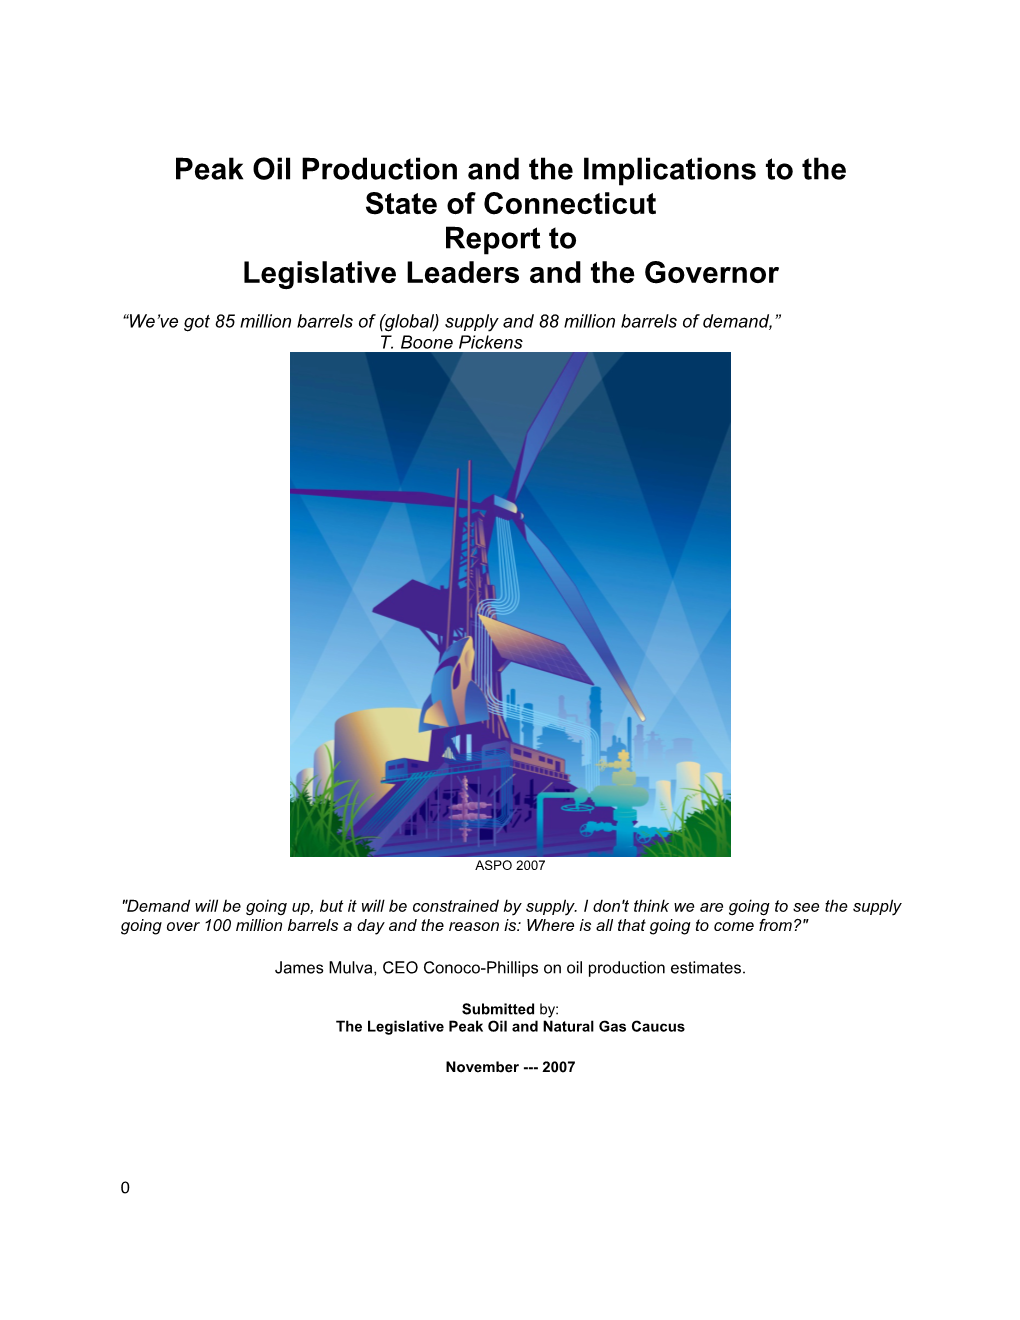 Peak Oil Production and the Implications to the State of Connecticut Report to Legislative Leaders and the Governor